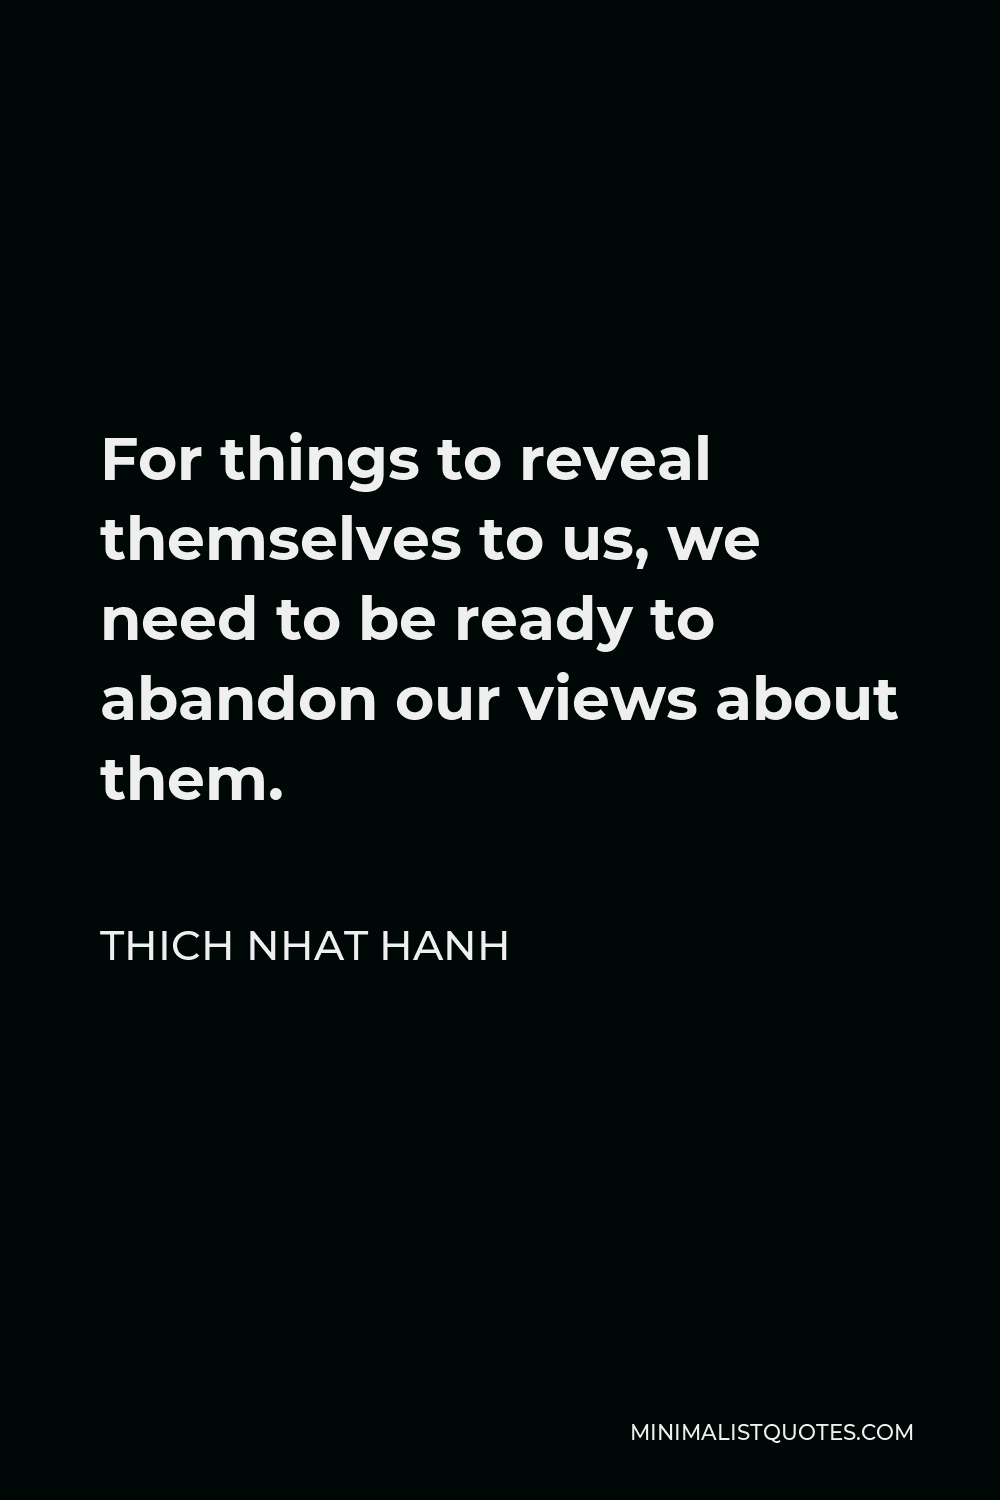 Thich Nhat Hanh Quote - For things to reveal themselves to us, we need to be ready to abandon our views about them.